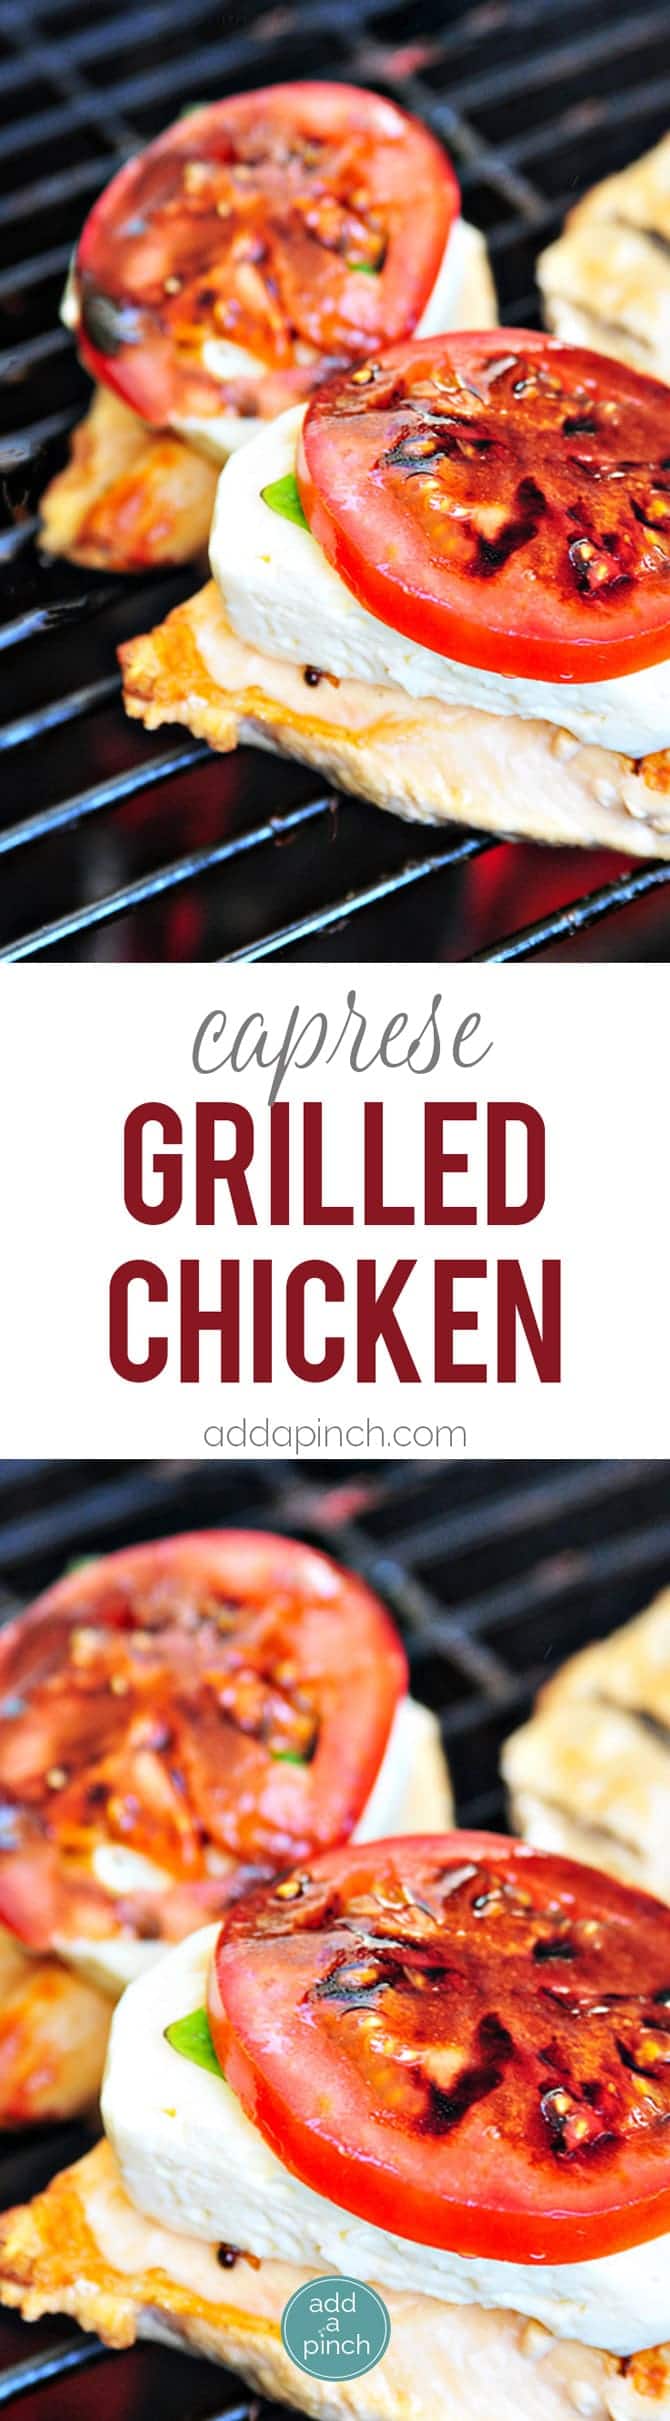 Caprese Grilled Chicken with Balsamic Reduction Recipe - A favorite caprese salad takes center stage with this delicious grilled chicken! // addapinch.com